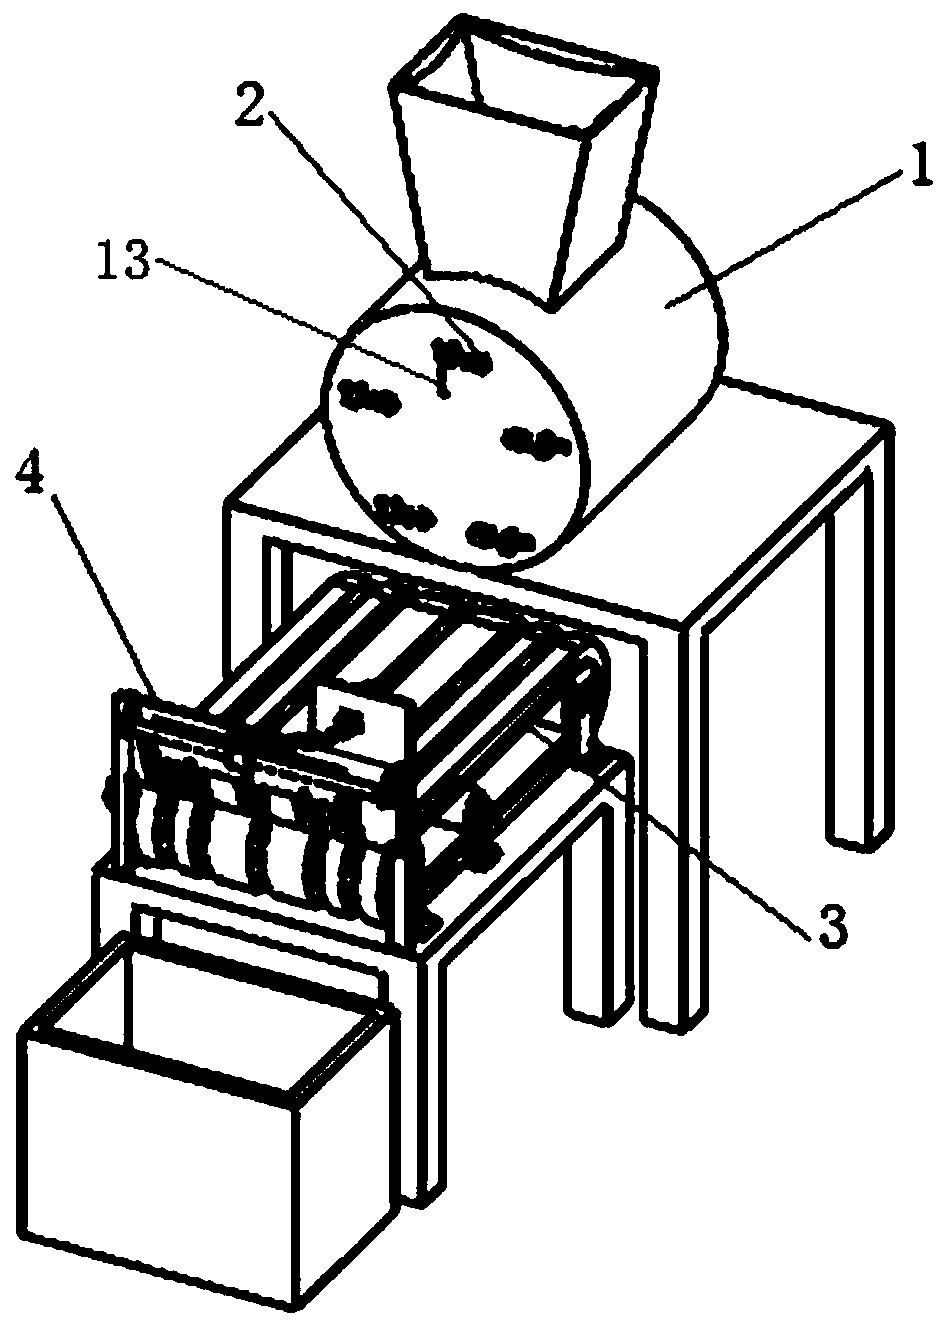 A material production device